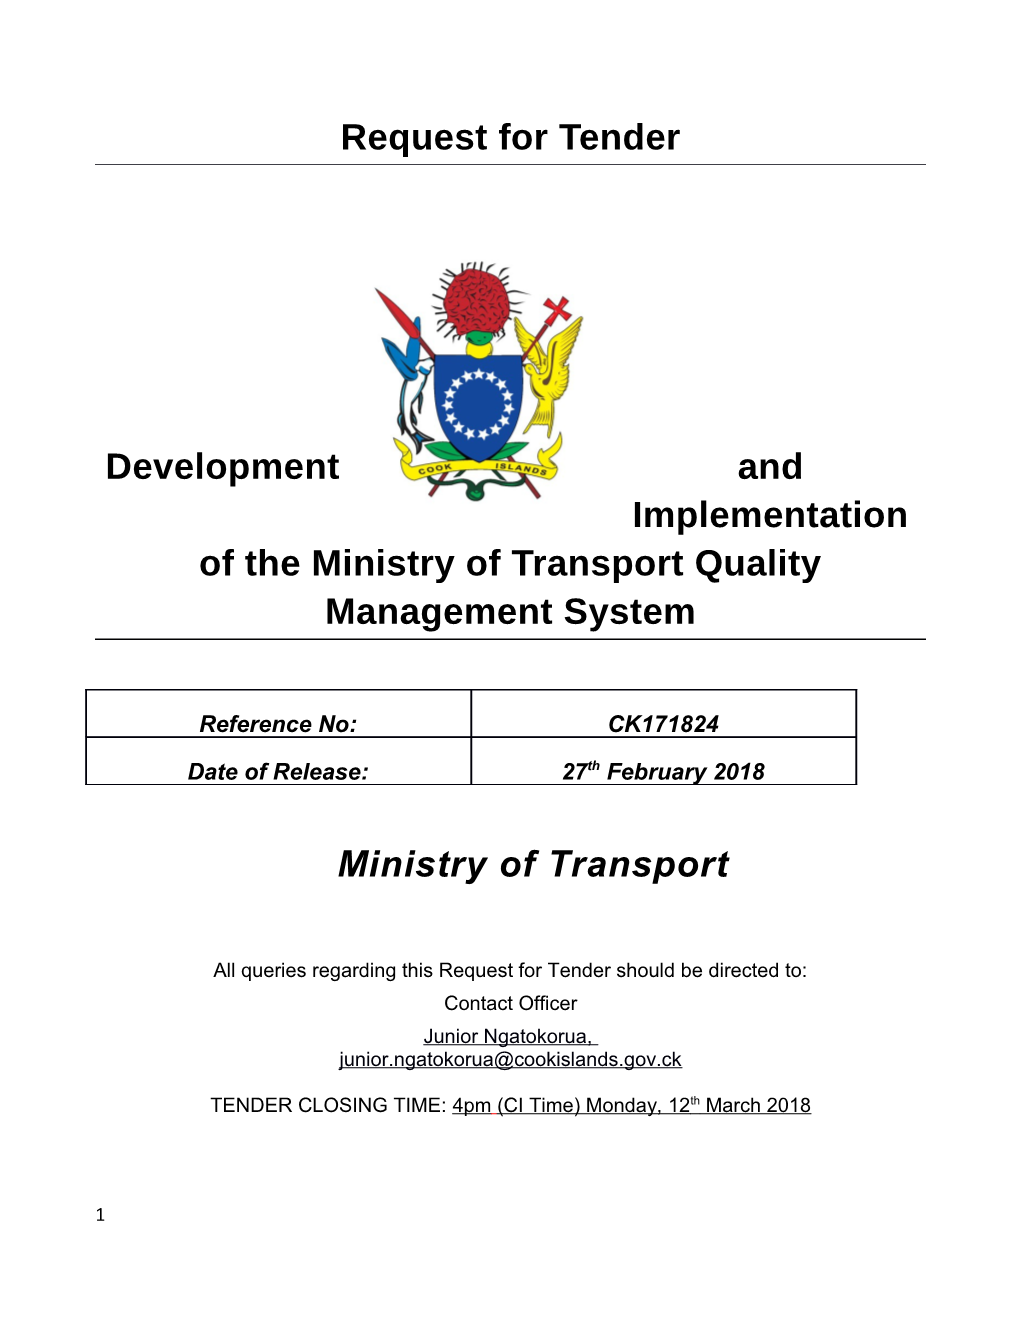 Development and Implementation of Theministry of Transport Quality Management System